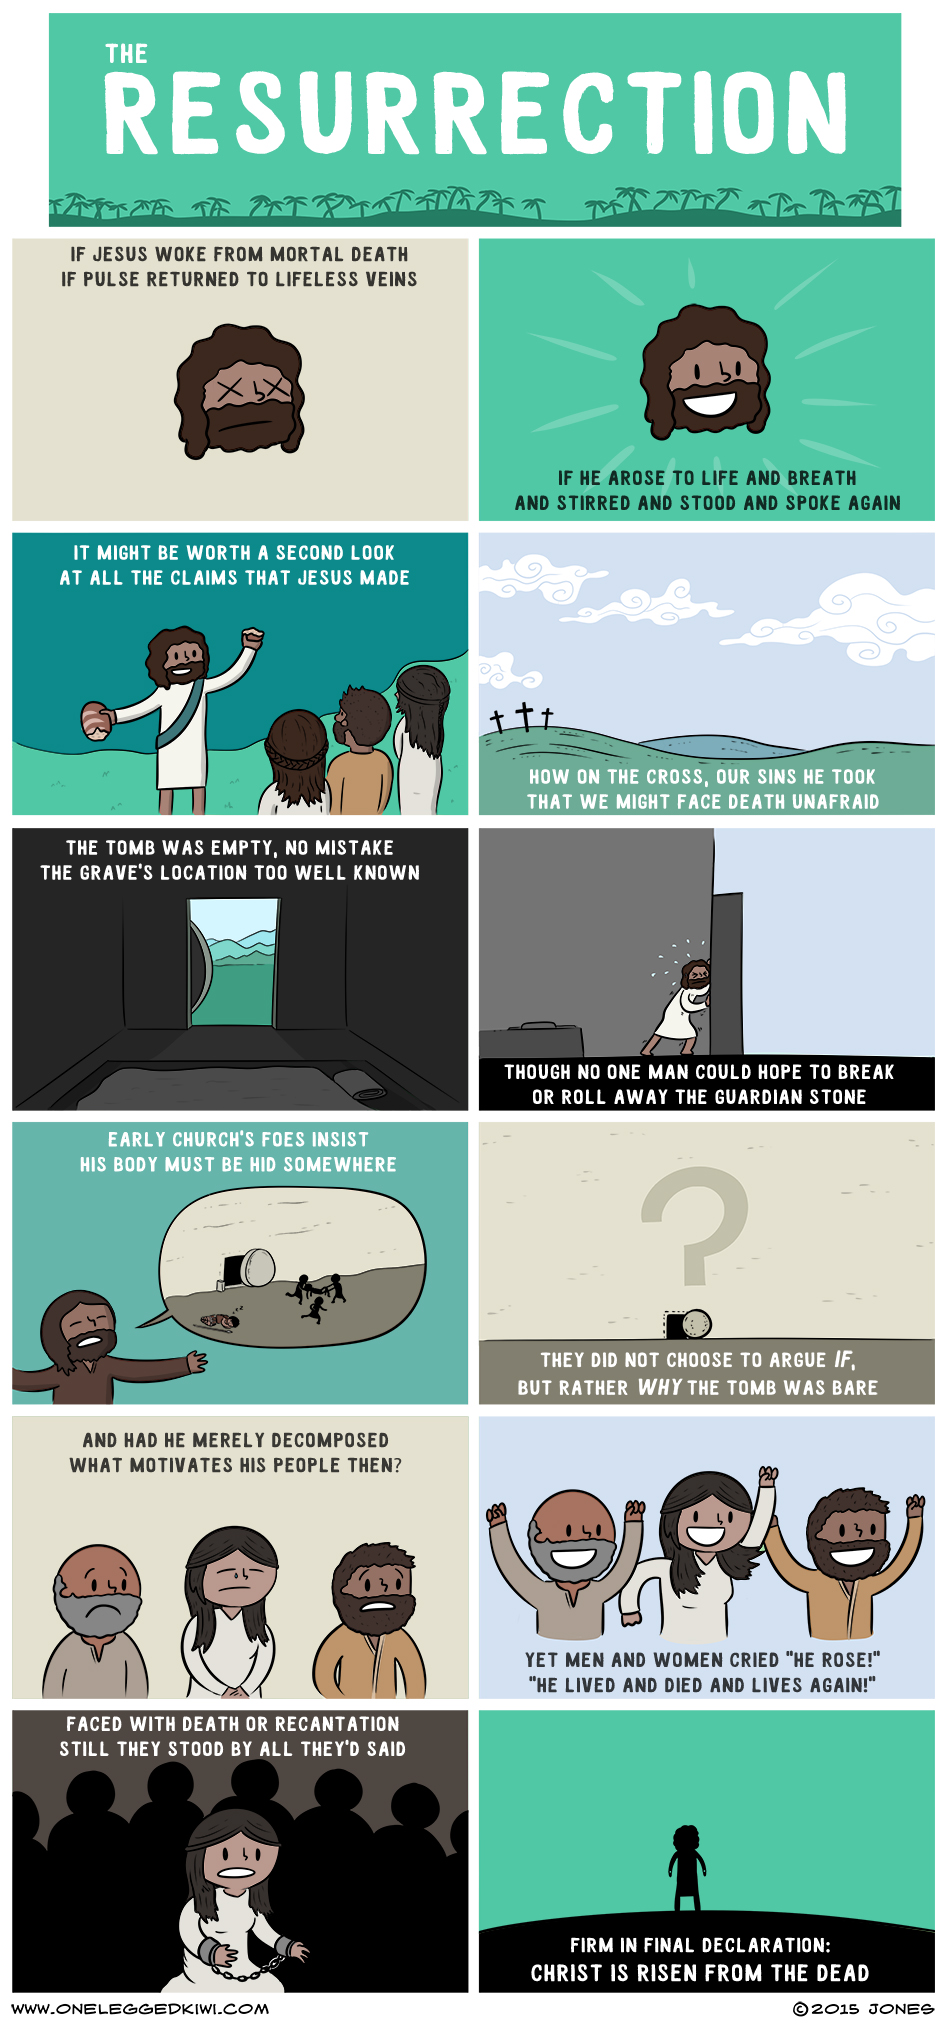 The resurrection - an illustrated poem by Anchor Lines, a Christian Webcomic